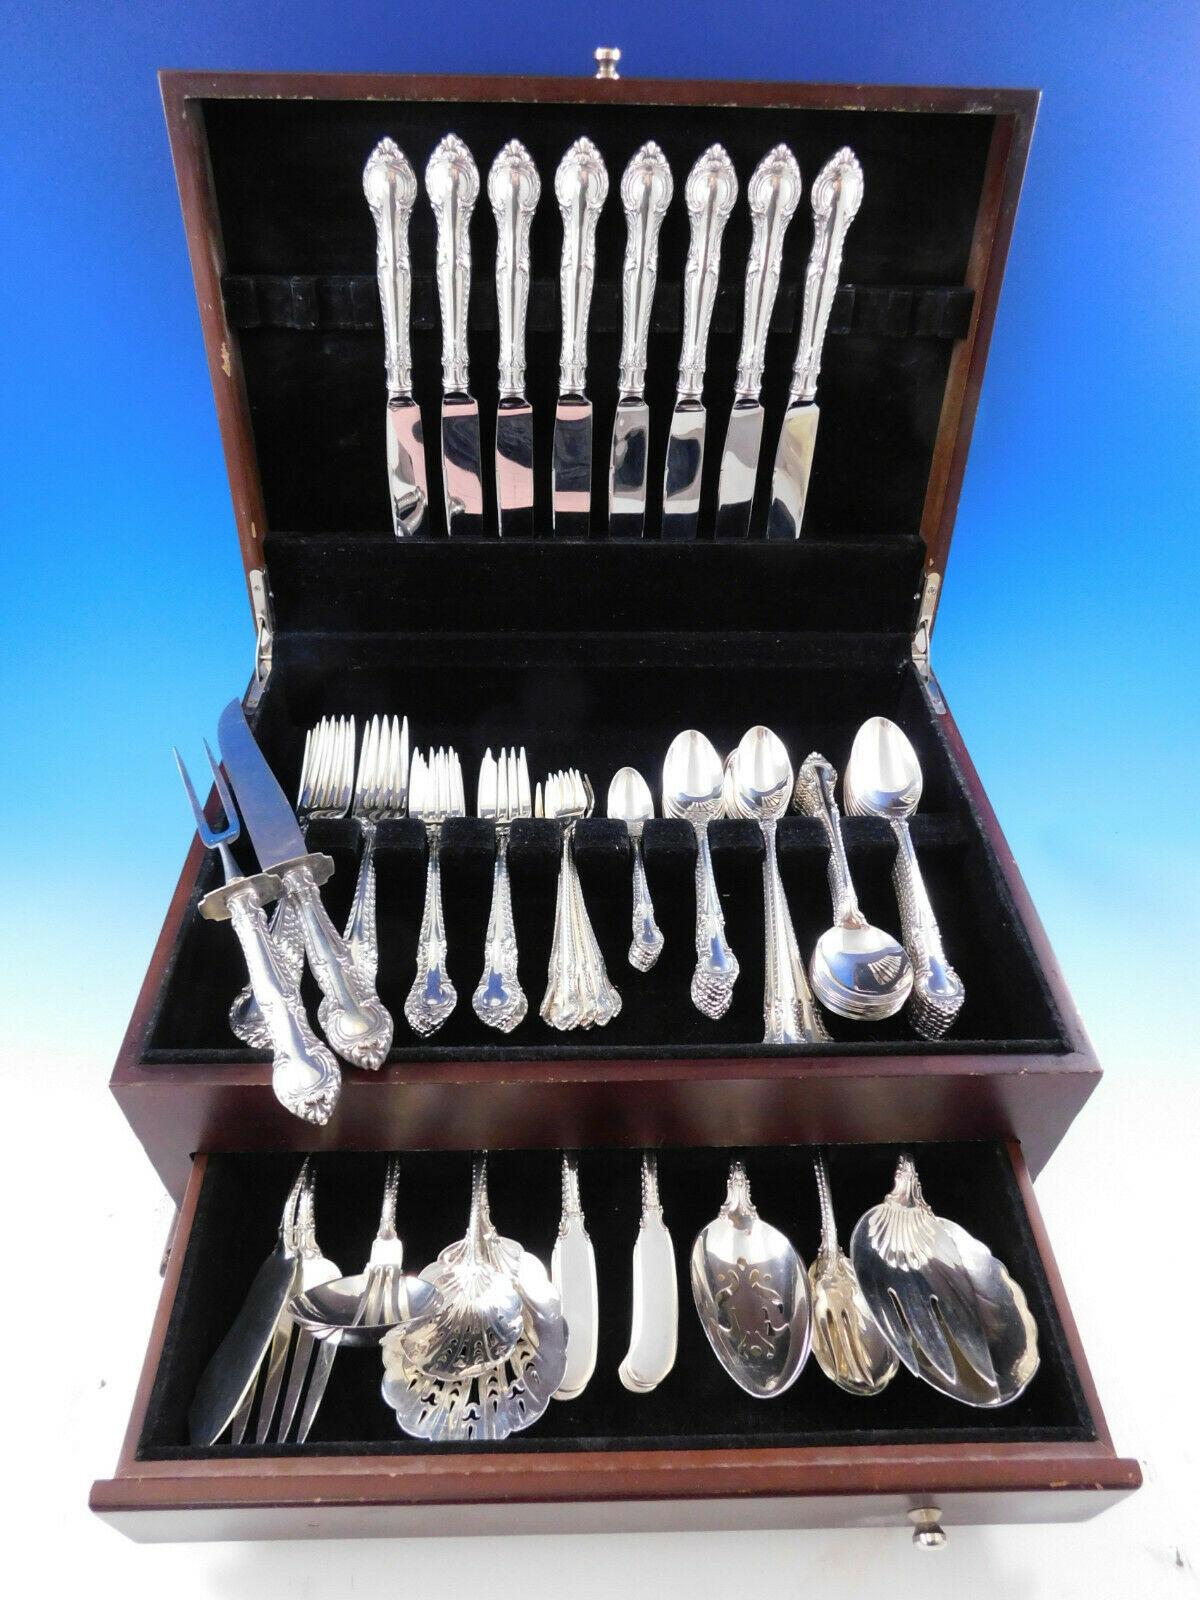 Superb dinner size English Gadroon by Gorham sterling silver flatware set, 94 pieces. This set includes:

8 dinner size knives, 9 1/2